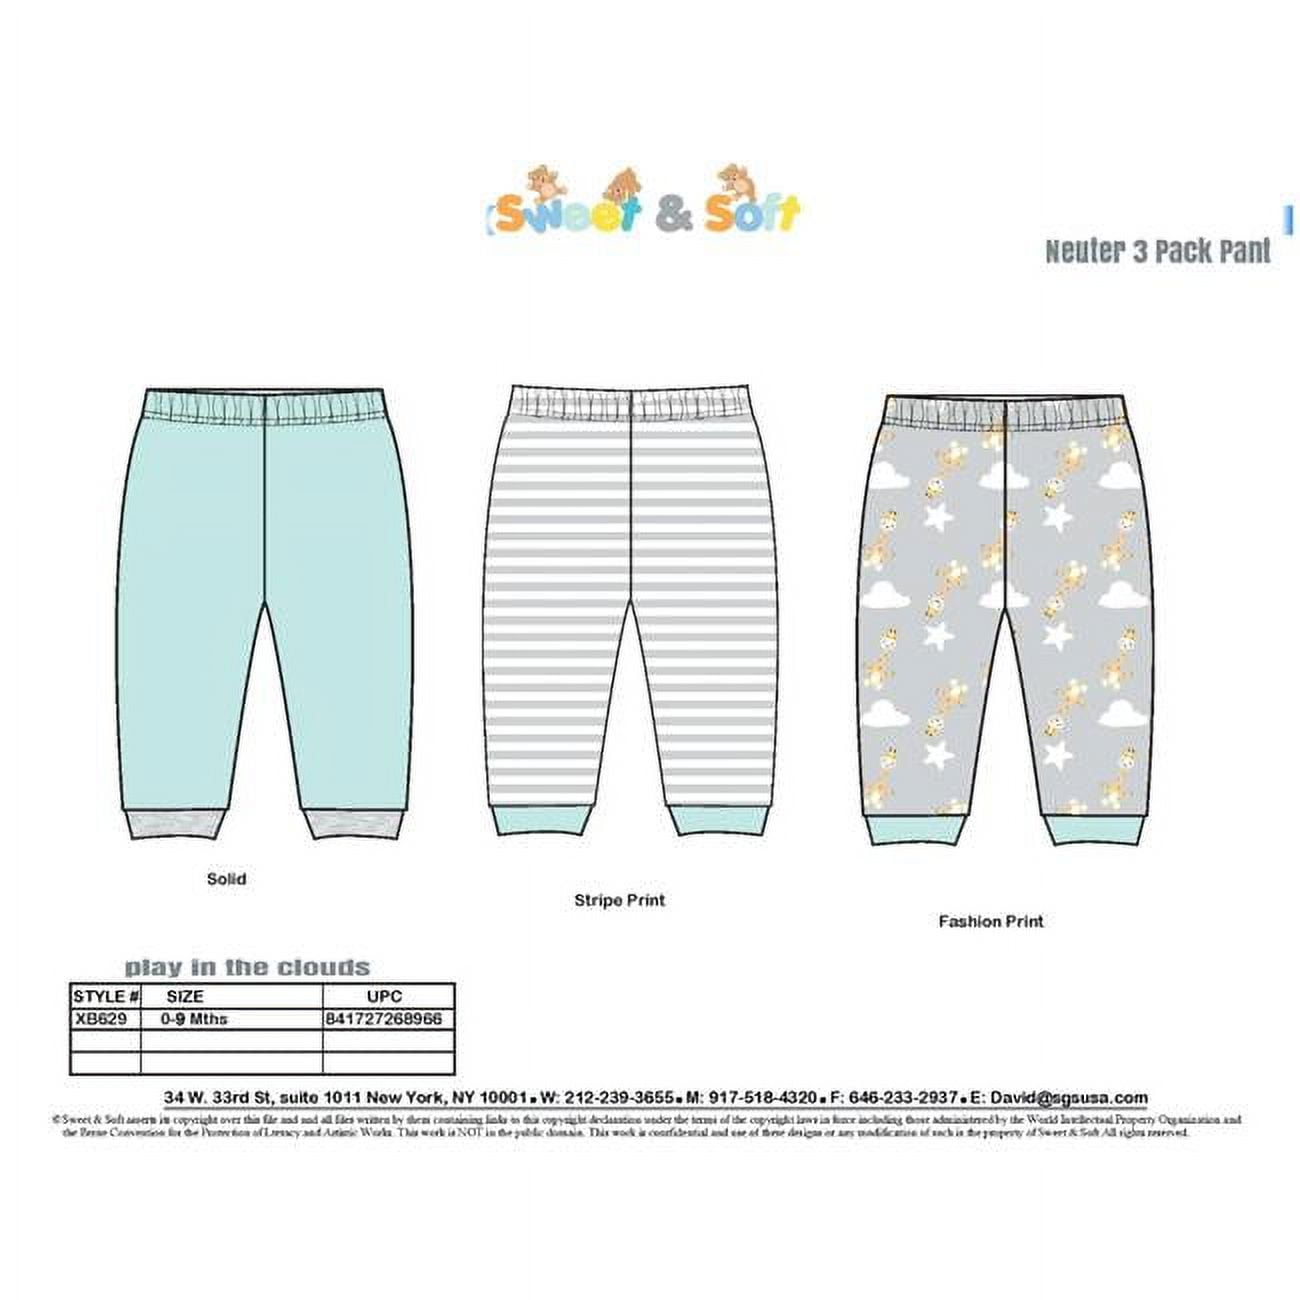 2363800 Babies Pants with Giraffe Collection, Mint, Grey & Yellow - Size 0-9M - 3 Per Pack - Case of 24 -  Sweet & Soft